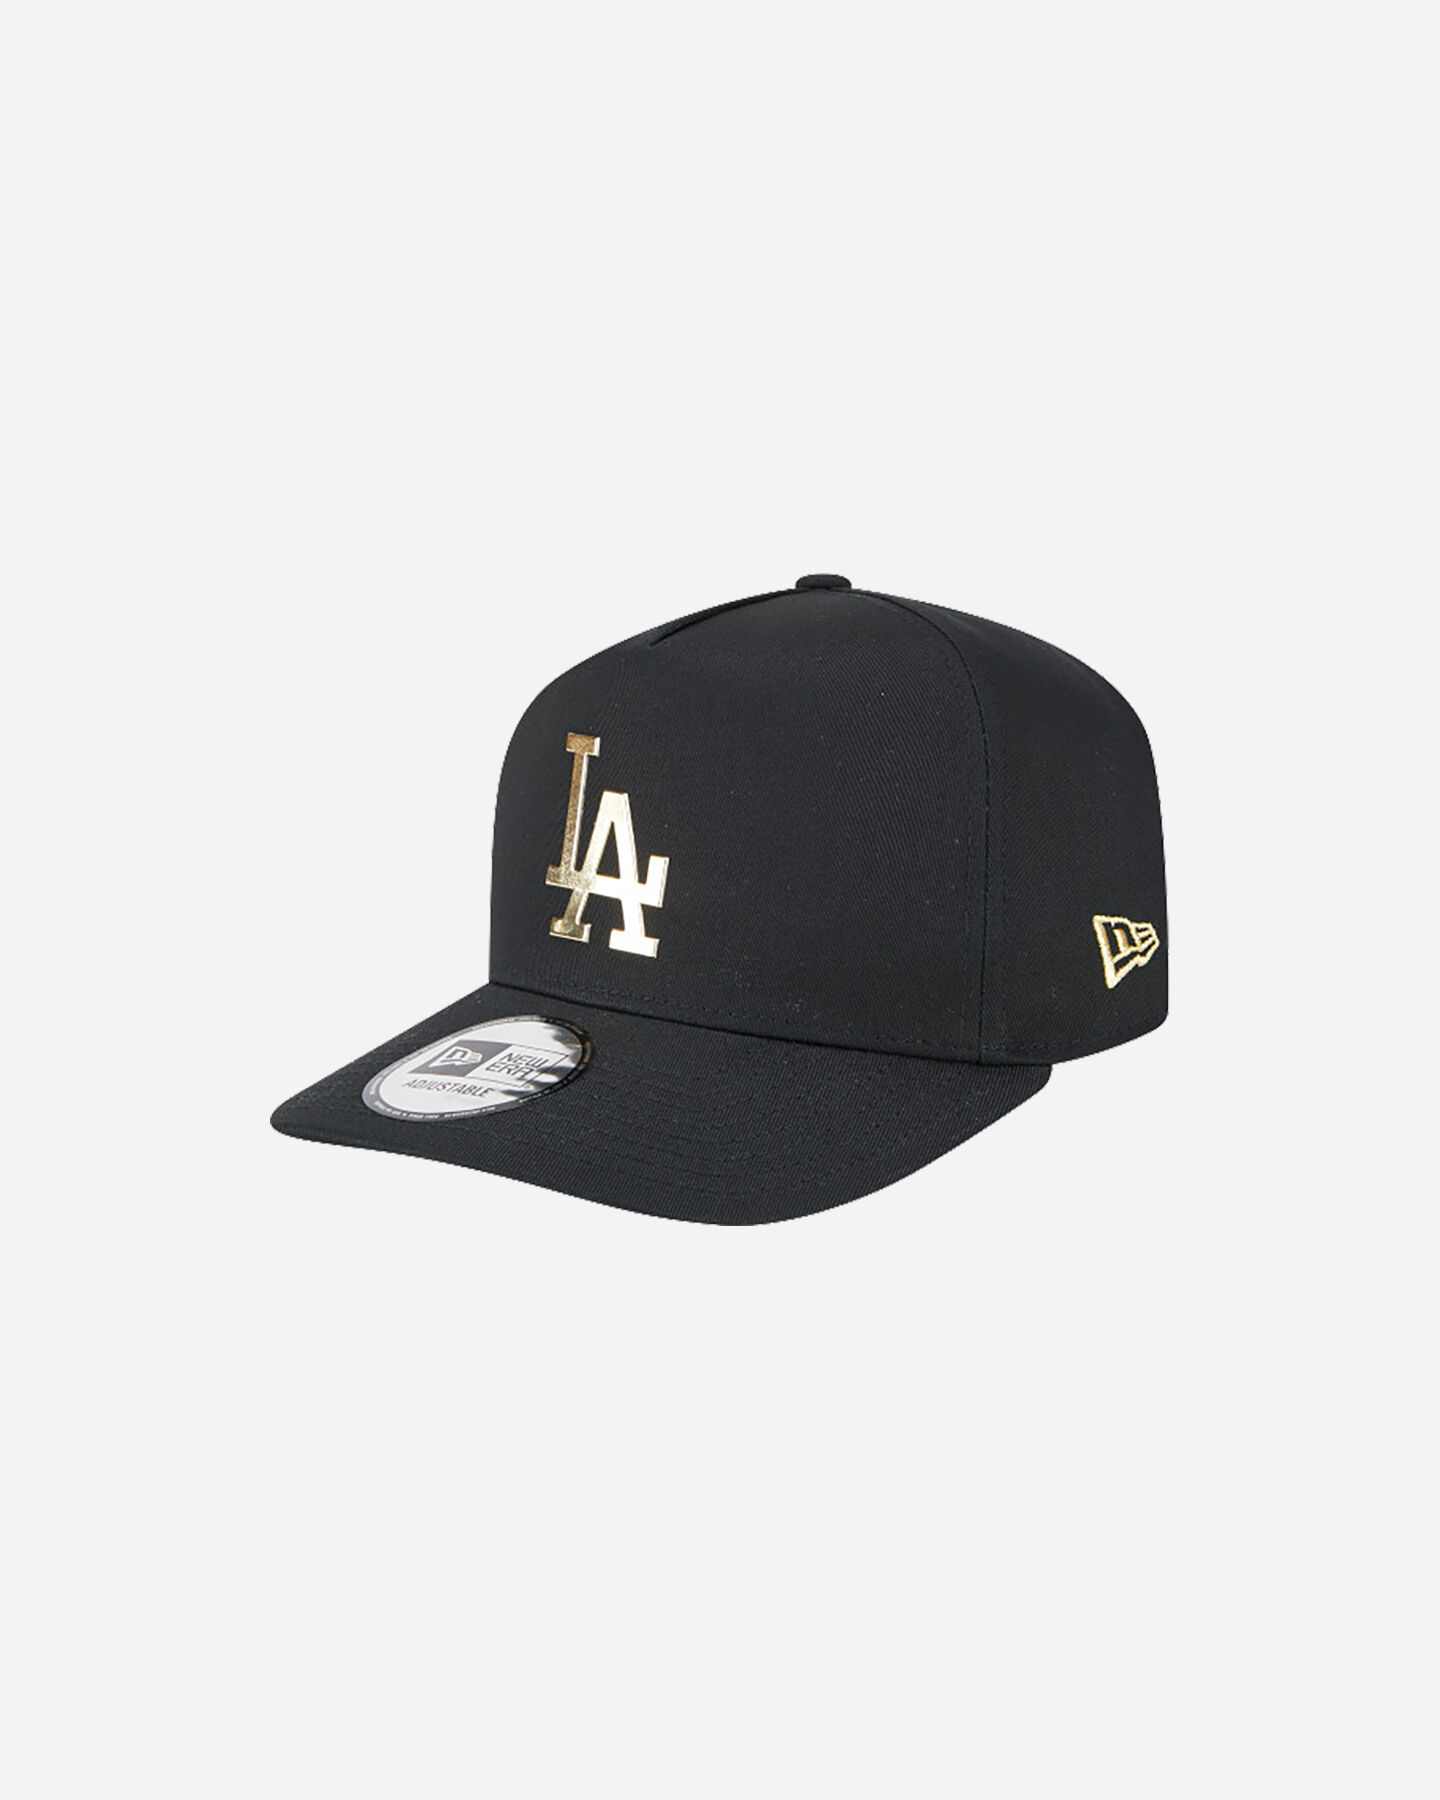  Cappellino NEW ERA 9FORTY MLB EFRAME FOIL LOS ANGELES DODGERS  S5630876|001|OSFM scatto 0